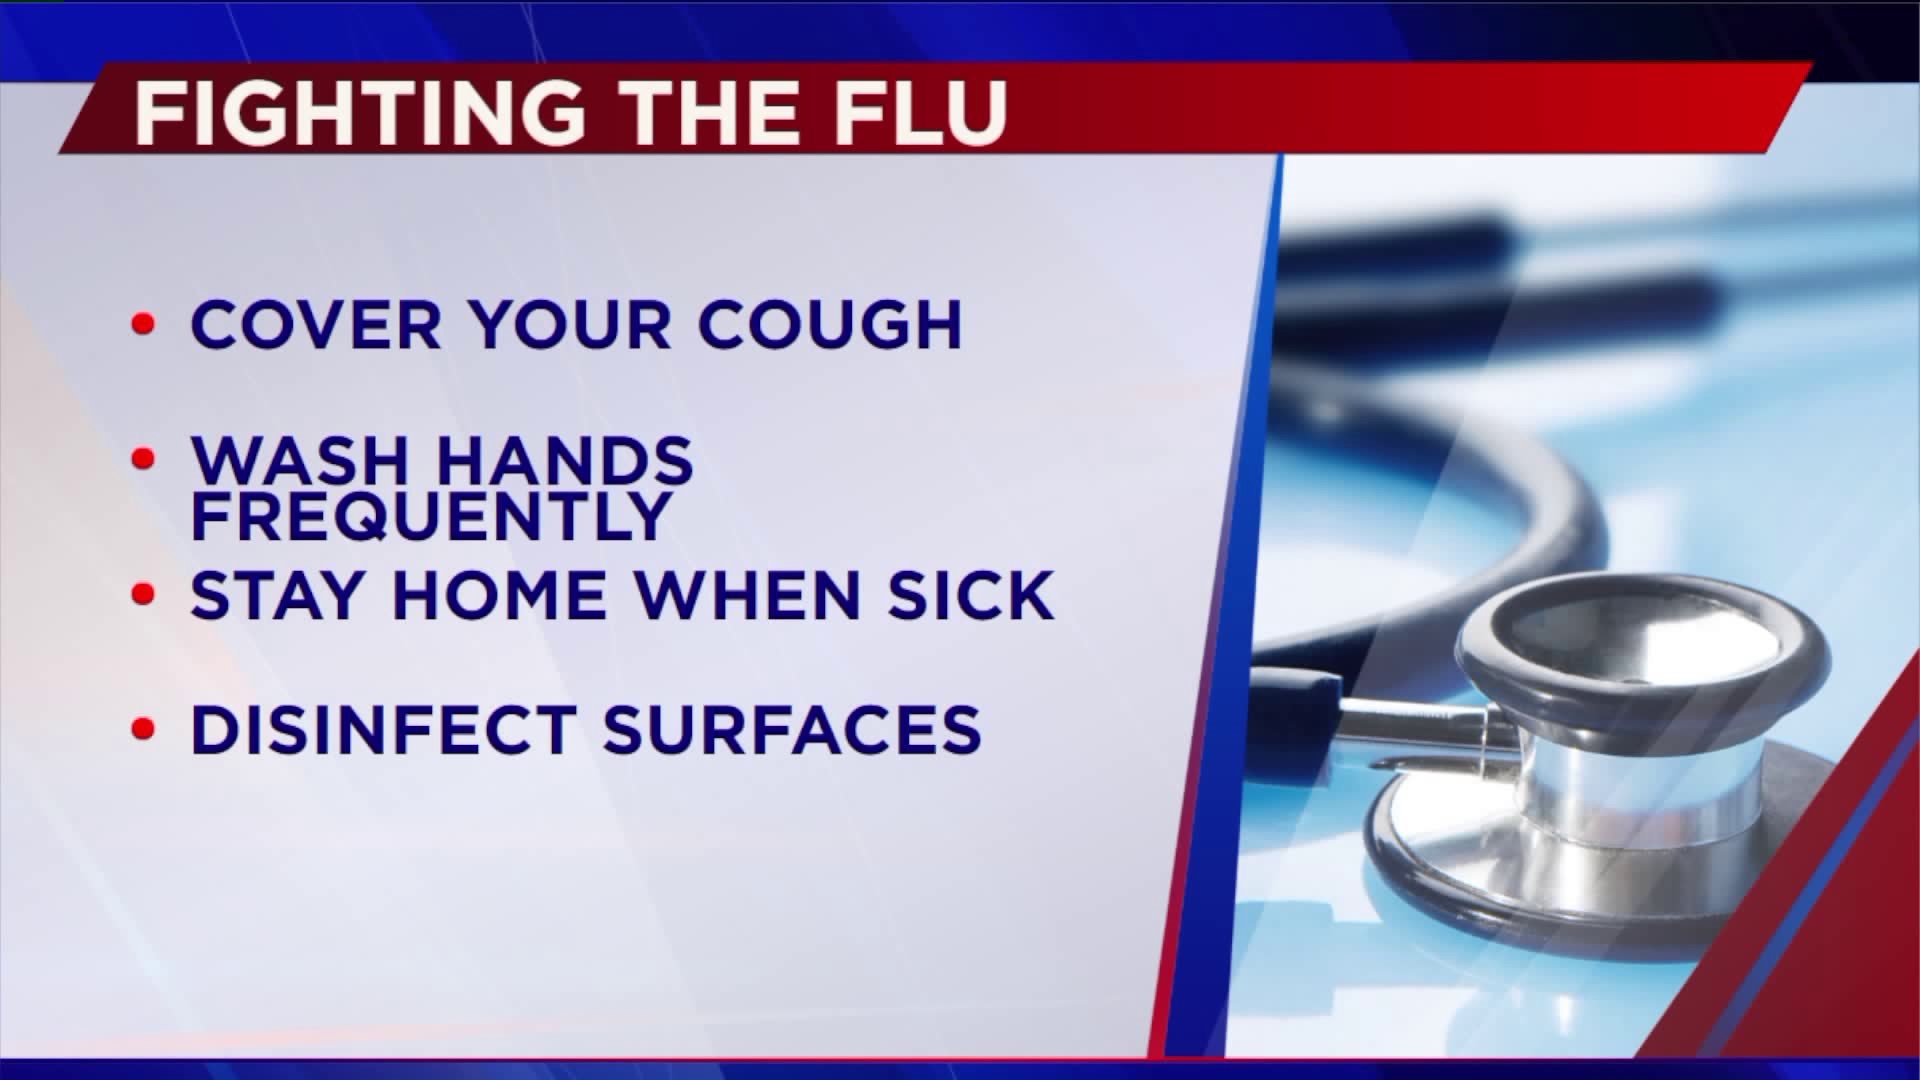 DPH says 9 new flu related deaths including 1 child